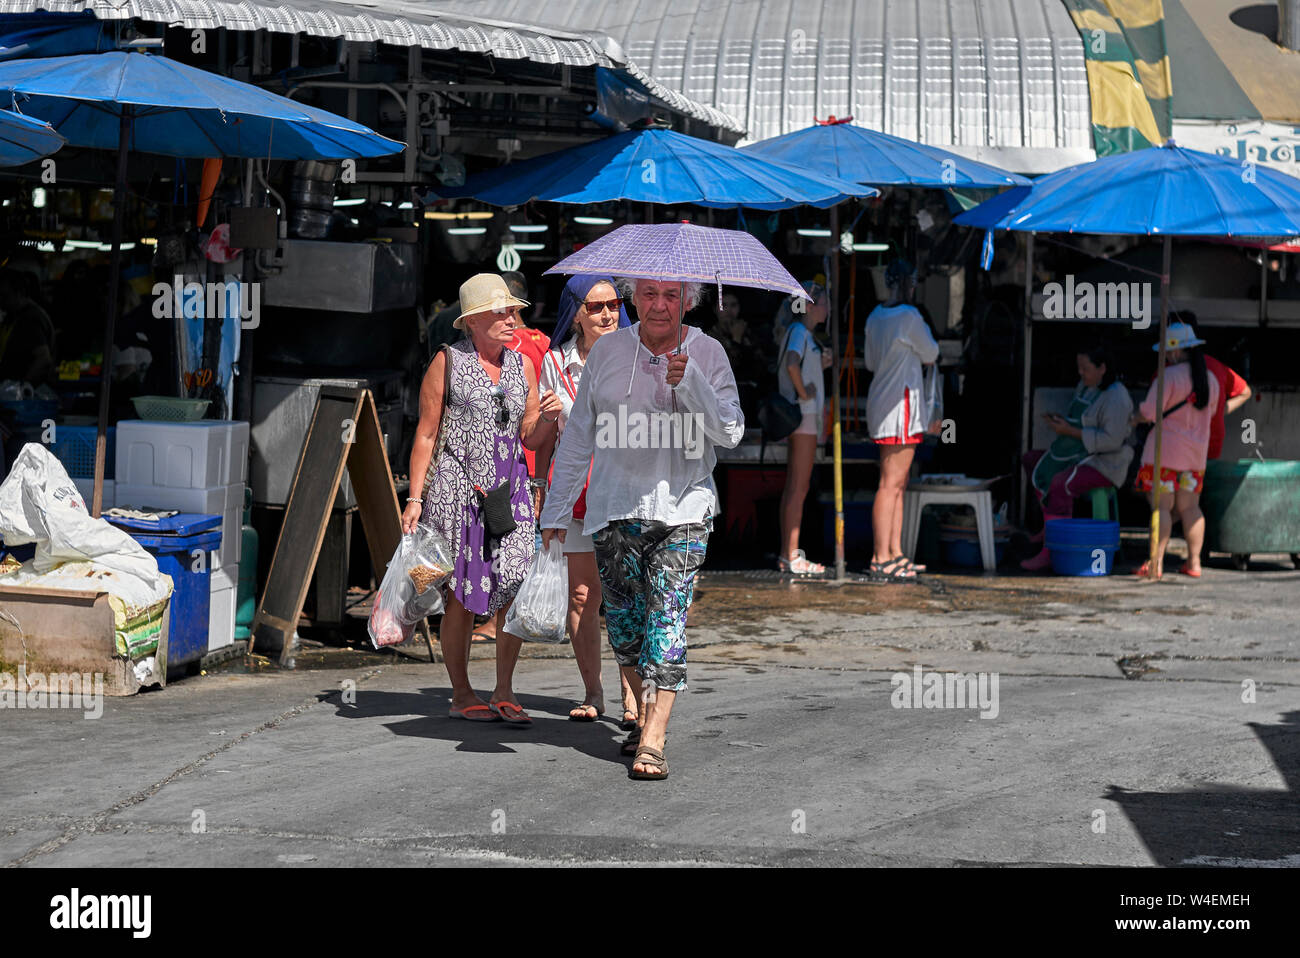 Man using an umbrella as a sunshade and sun protection aid against the extreme tropical sun in Thailand Southeast Asia Stock Photo